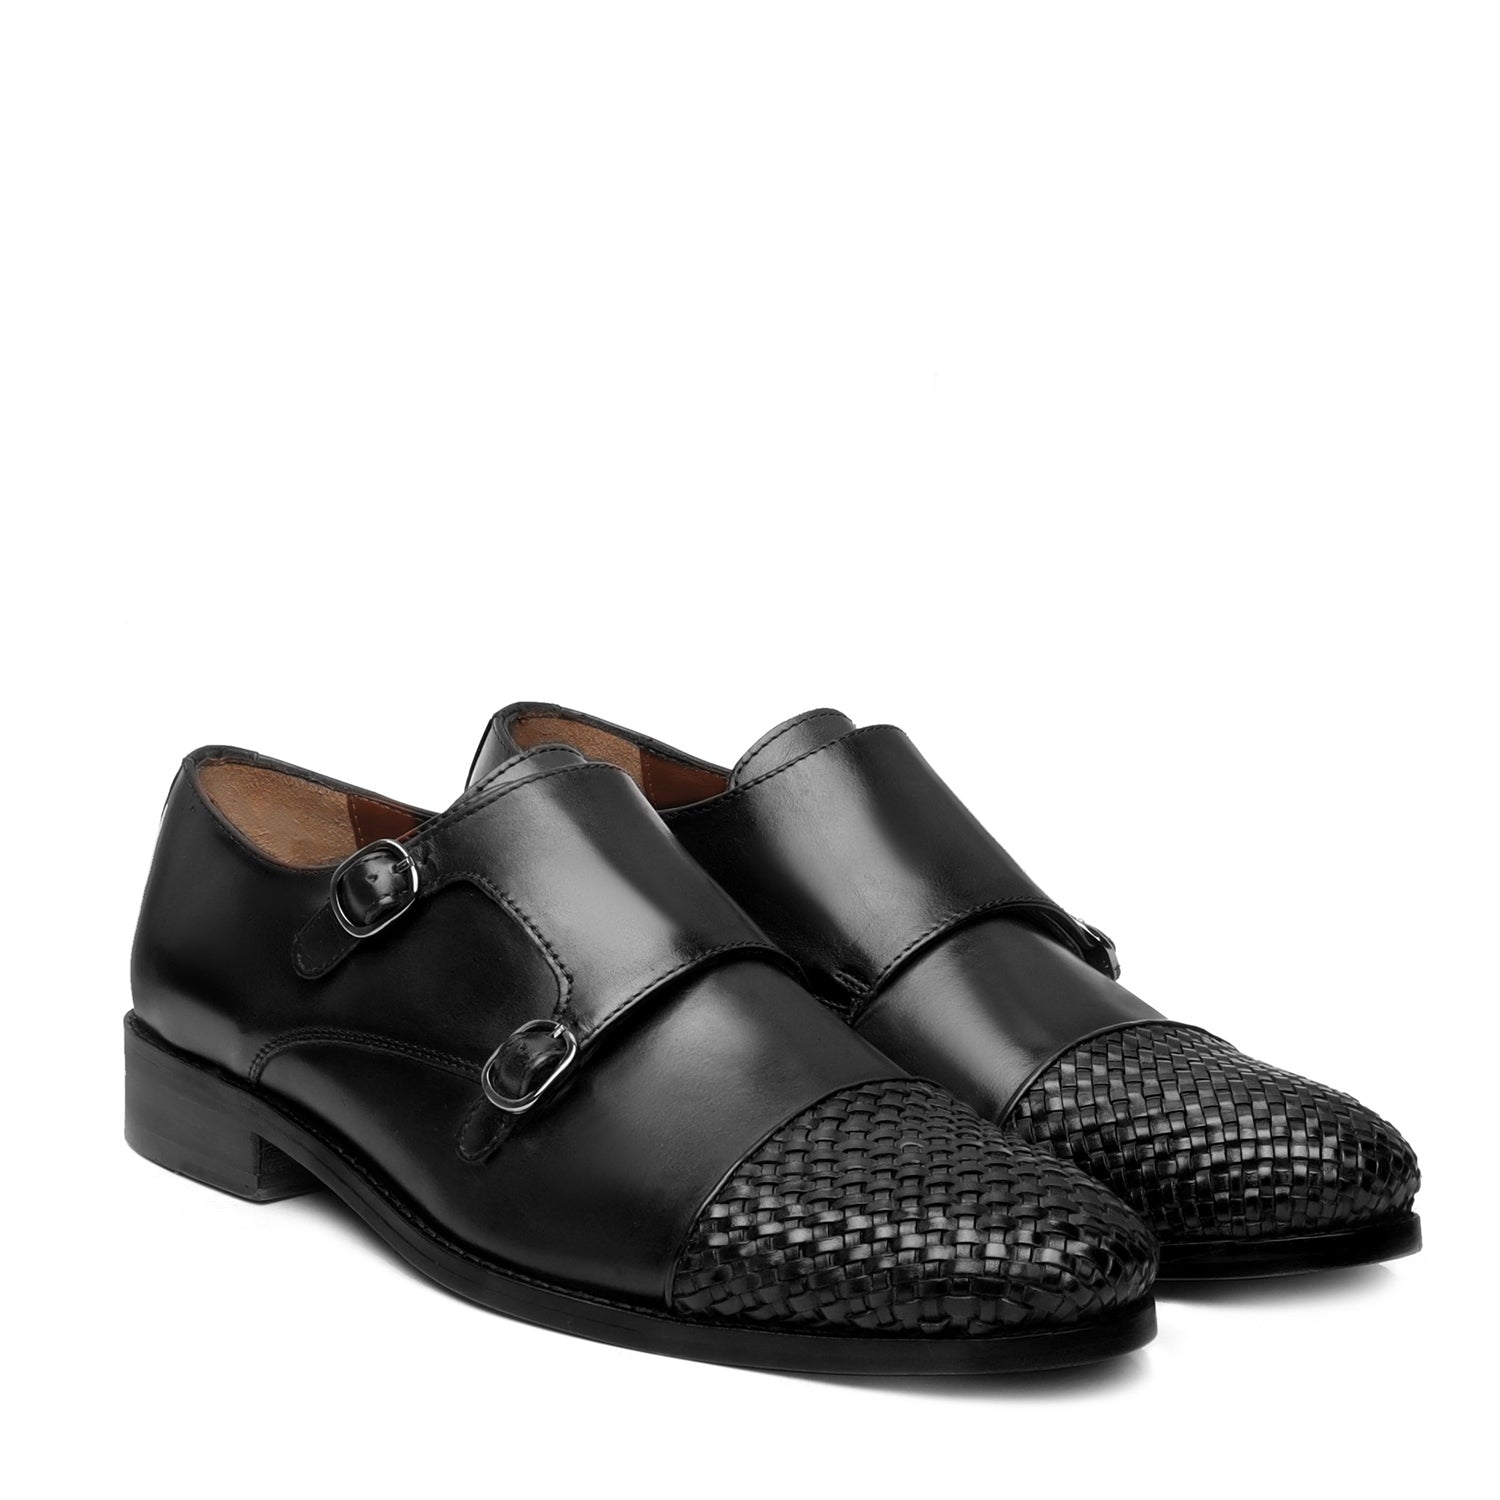 Black Contrasting Cap Toe Leather Woven Detailed Double Monk With Leather Sole Shoes By Brune & Bareskin